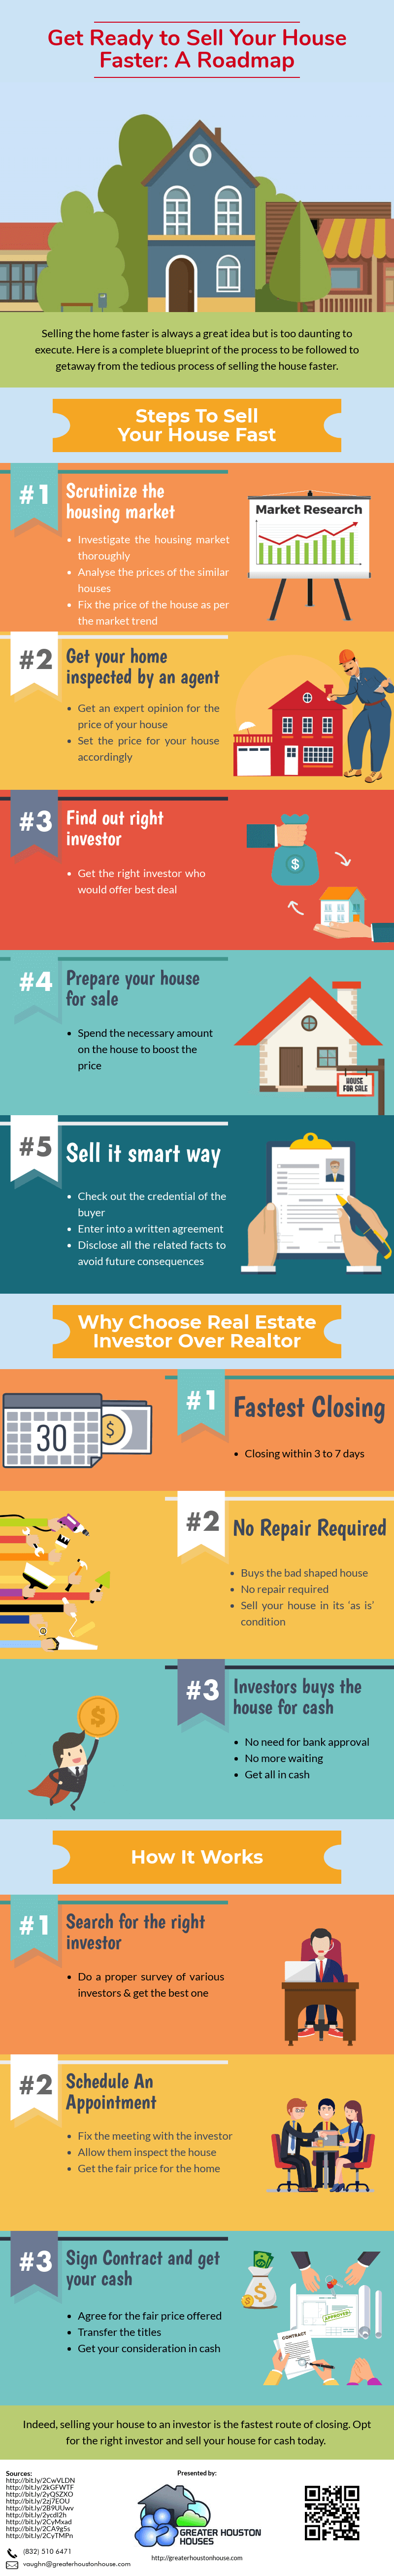 Get Ready to Sell Your House Faster – A Roadmap